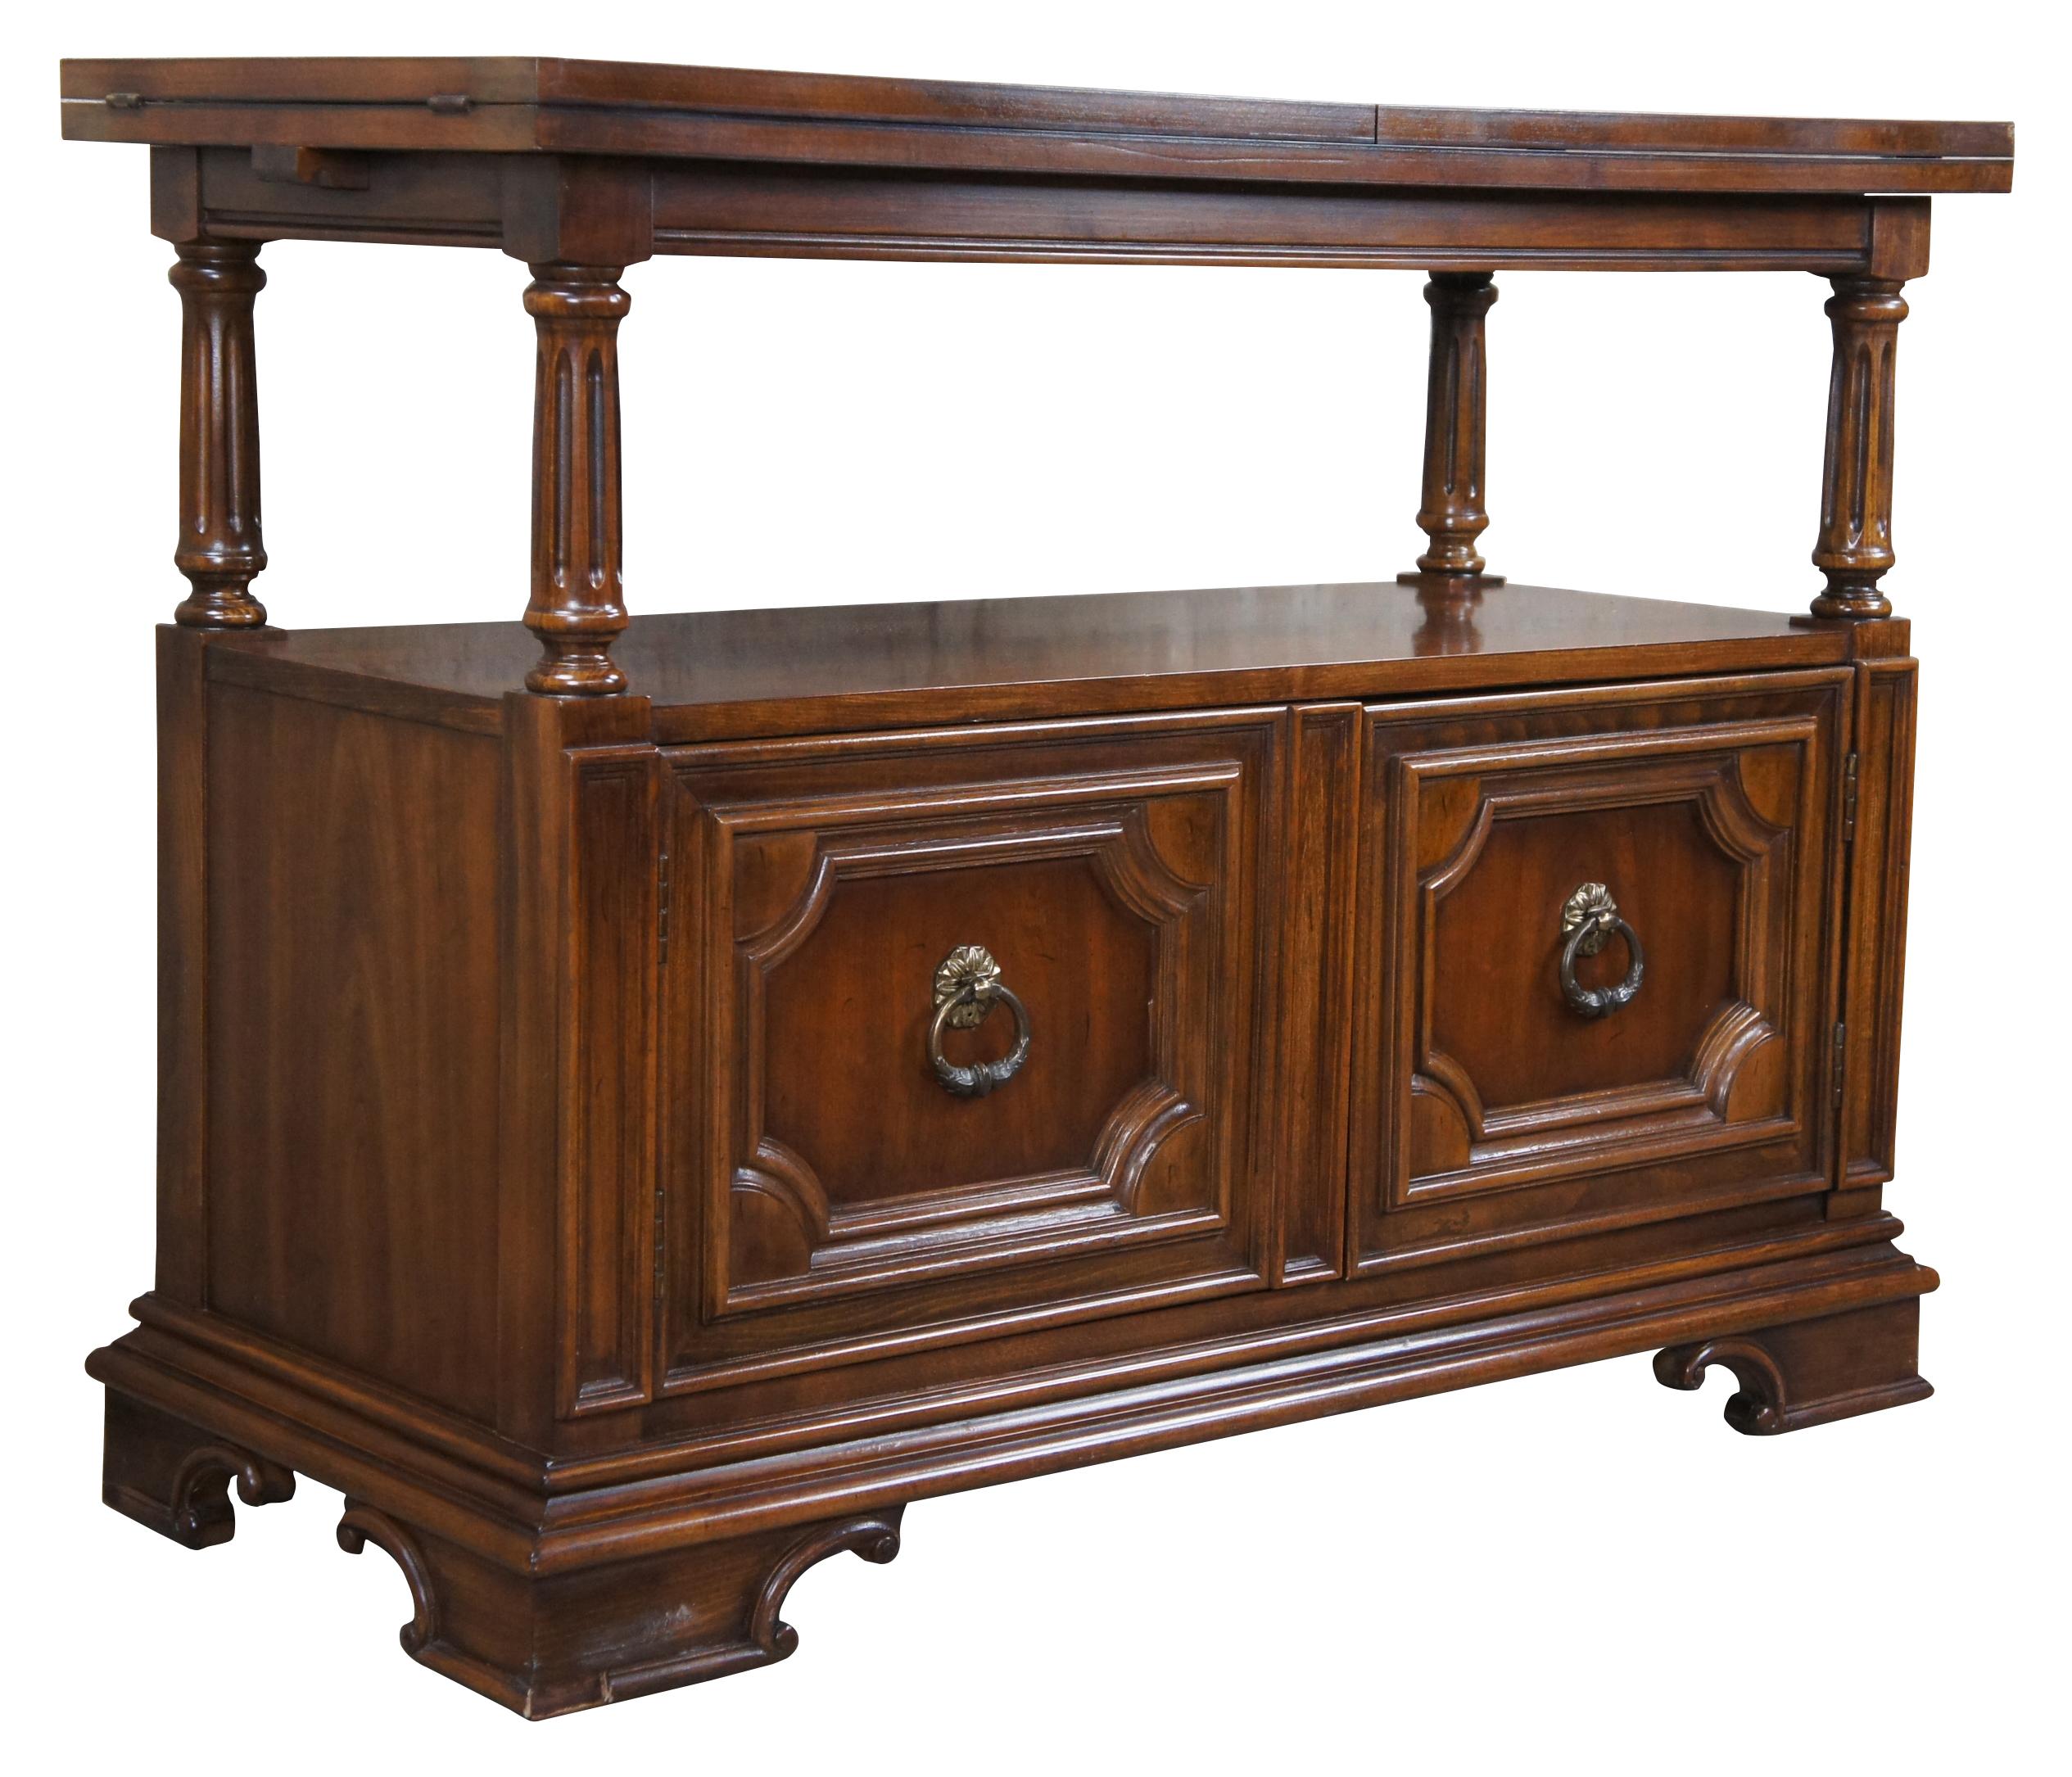 Thomasville traditional flip top server, circa 1980s. A rectangular form featuring an open center supported by turned and fluted columns. The lower cabinet is accented by inset molding and knocker pulls. When open, the top has a sleek black Formica